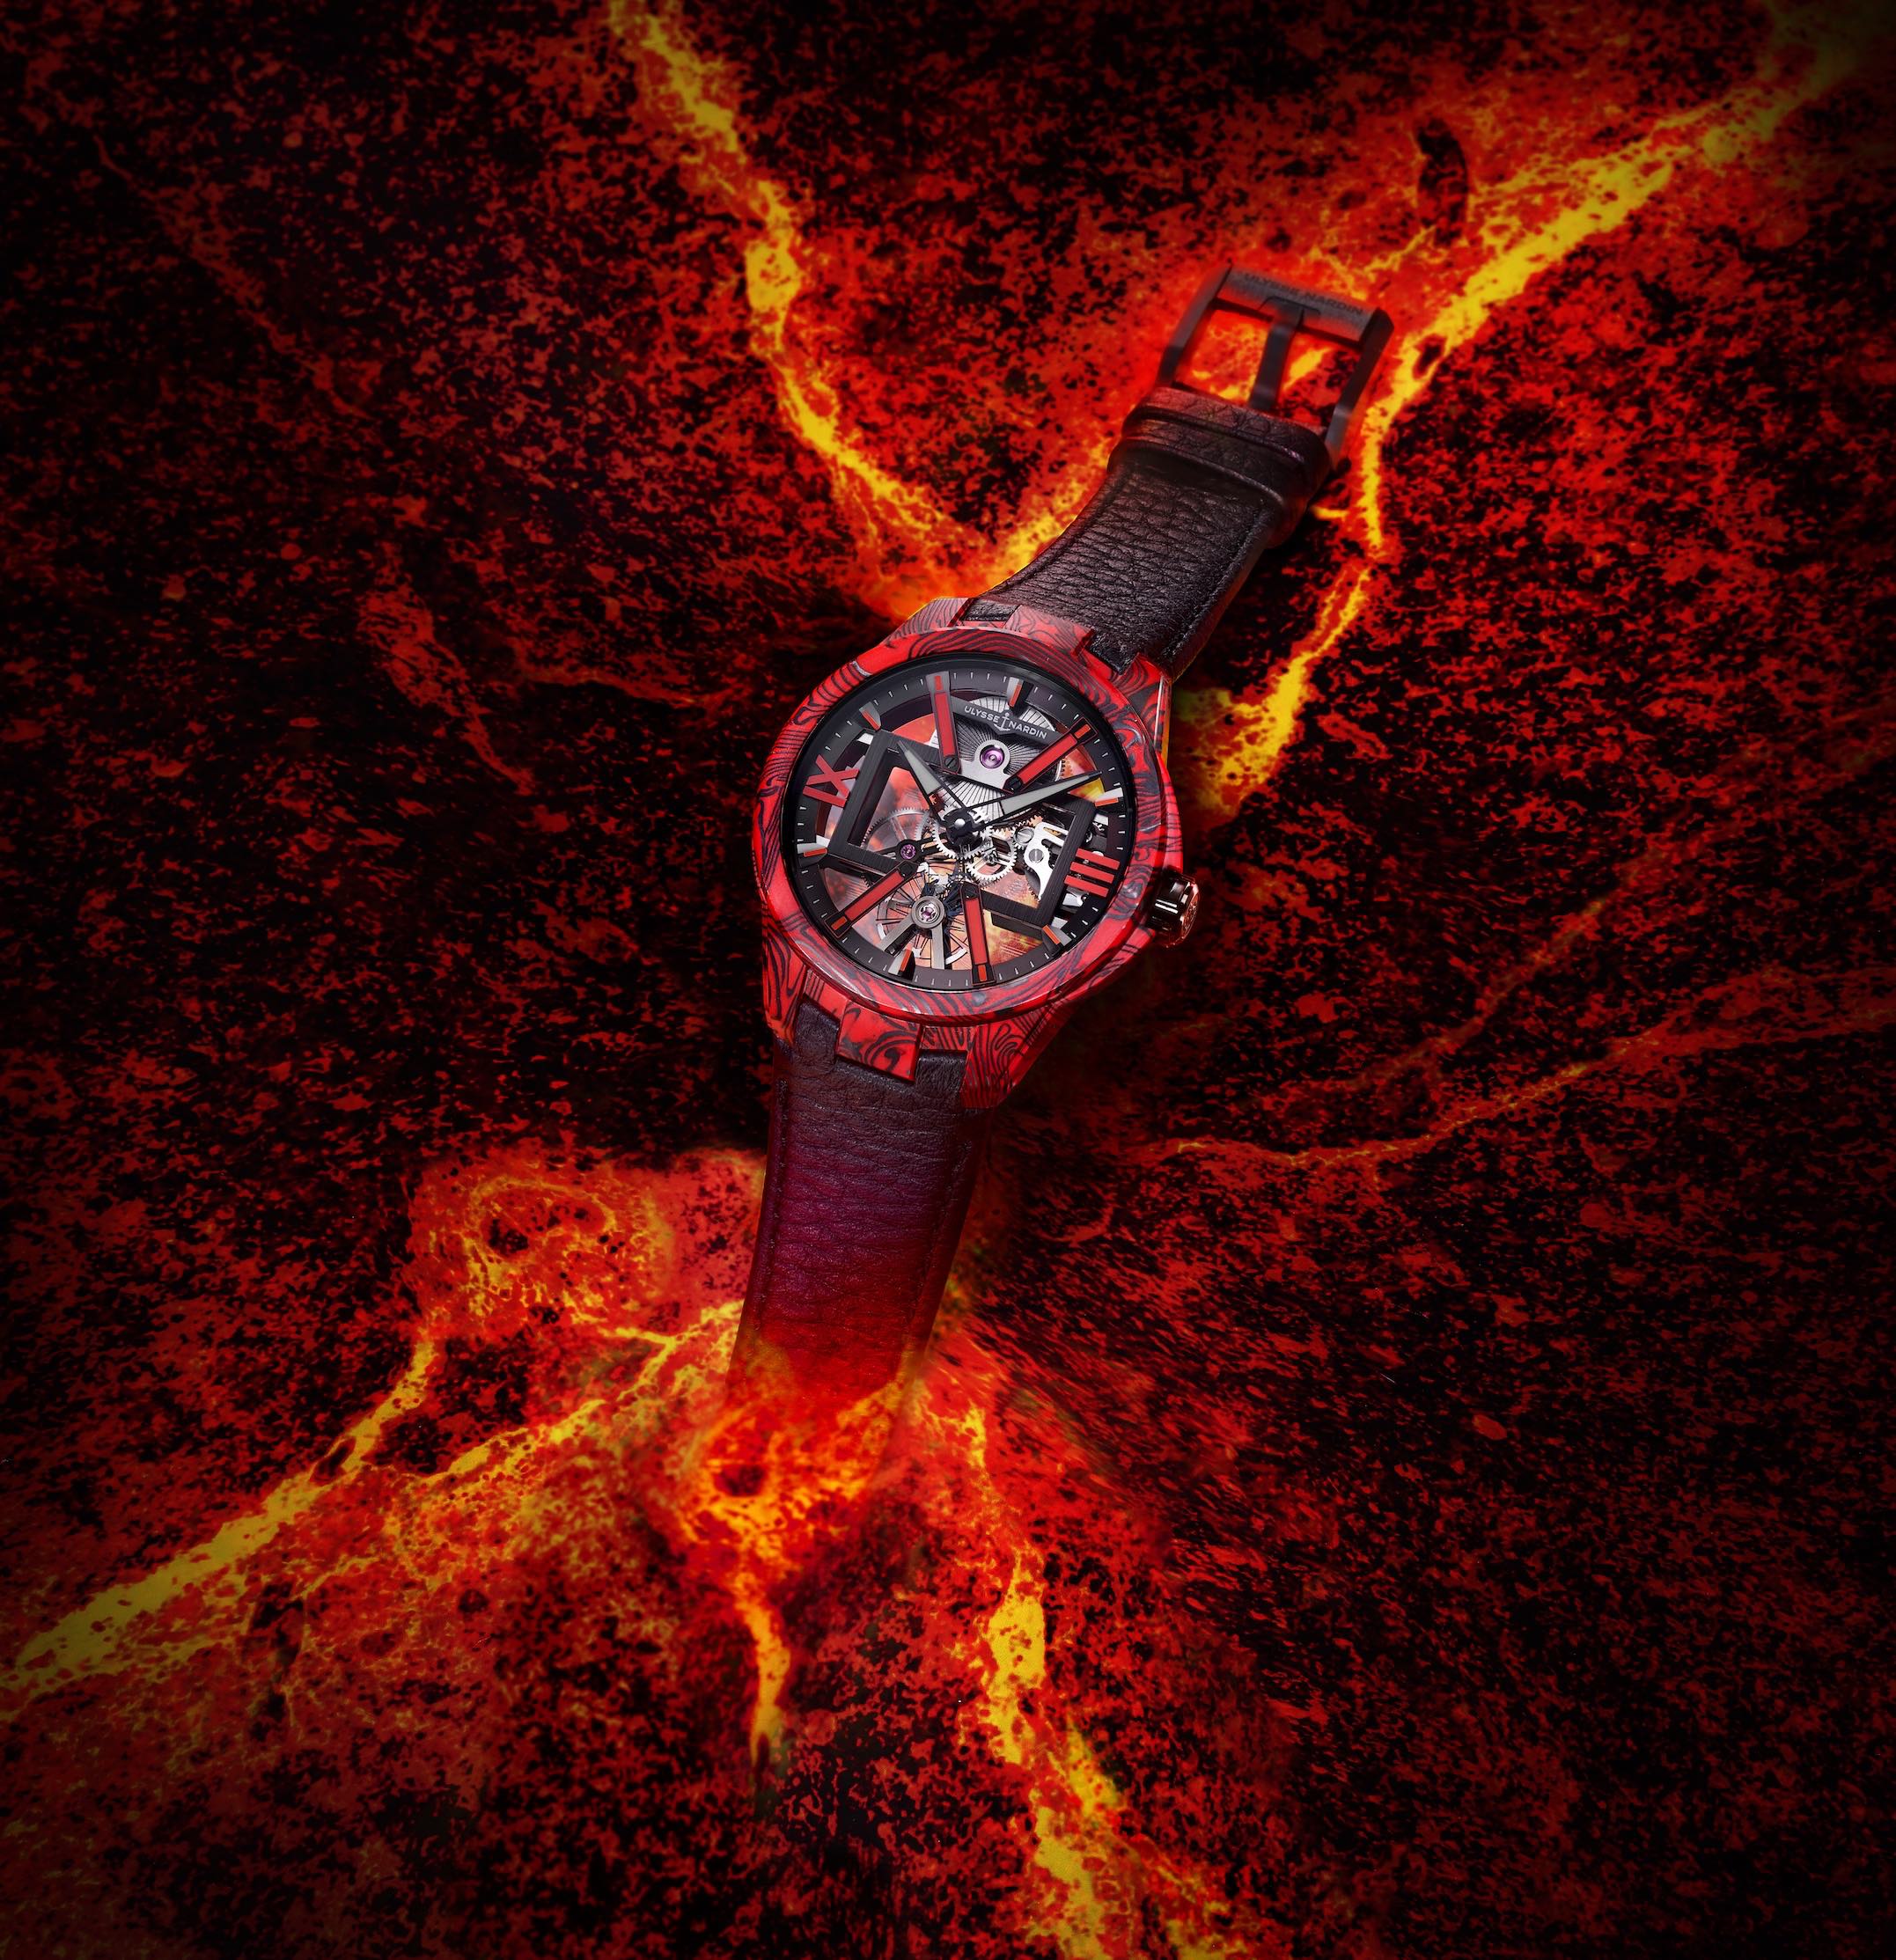 Ulysse Nardin To Launch Skeleton Magma X In US At Haute Living’s Luxe & Leisure Weekend At Brickell City Centre Miami